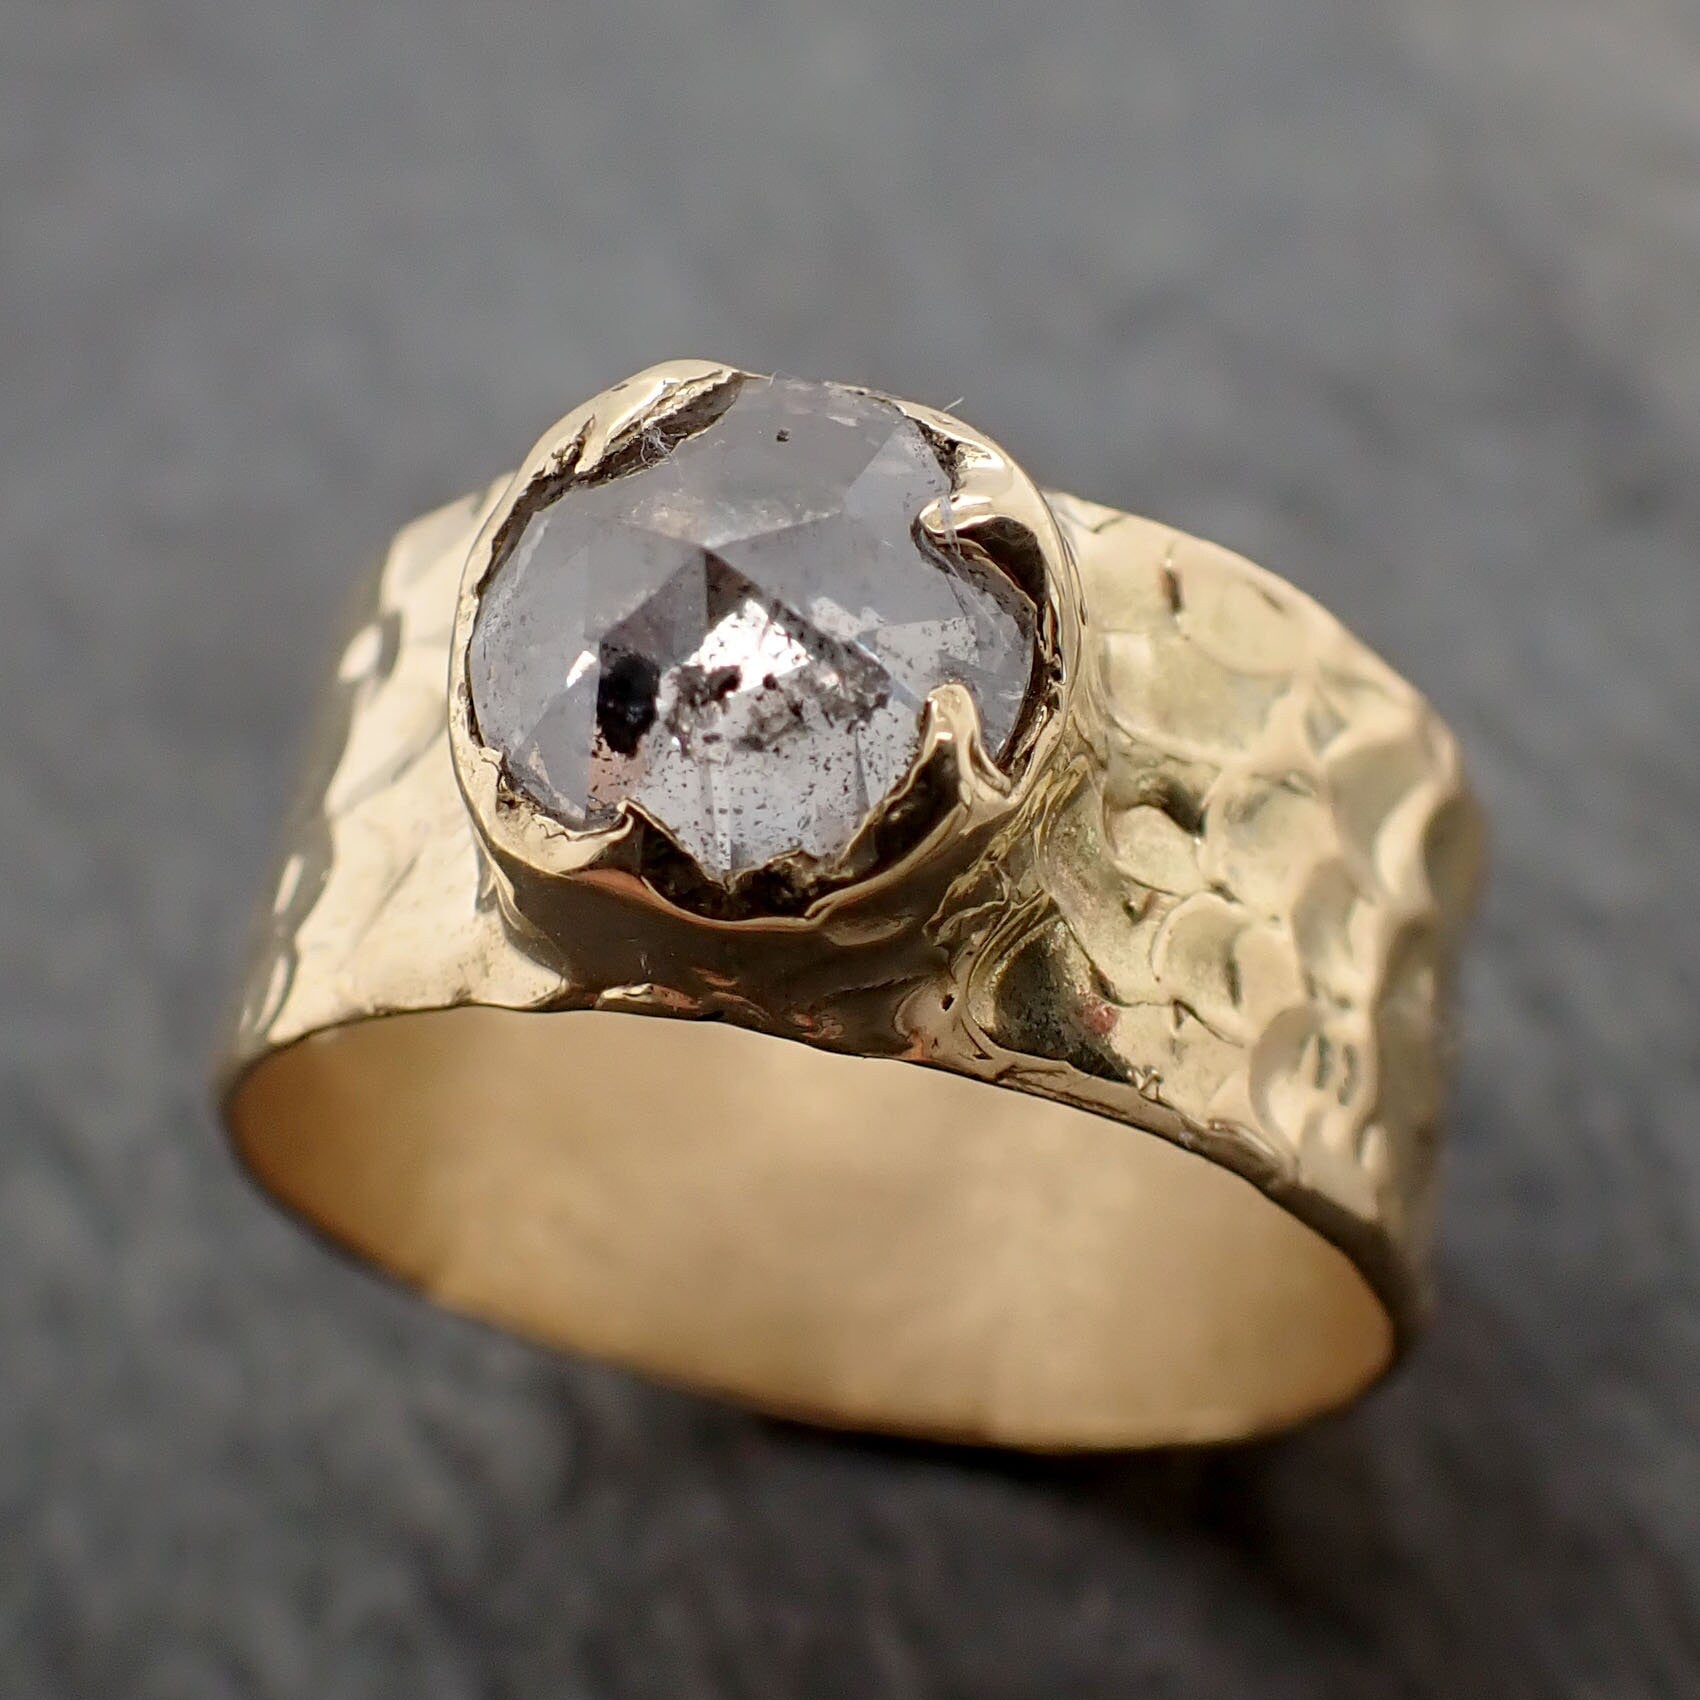 Fancy cut Salt and pepper Diamond Solitaire Engagement 14k yellow Gold Cigar Ring Cocktail Ring byAngeline 3222